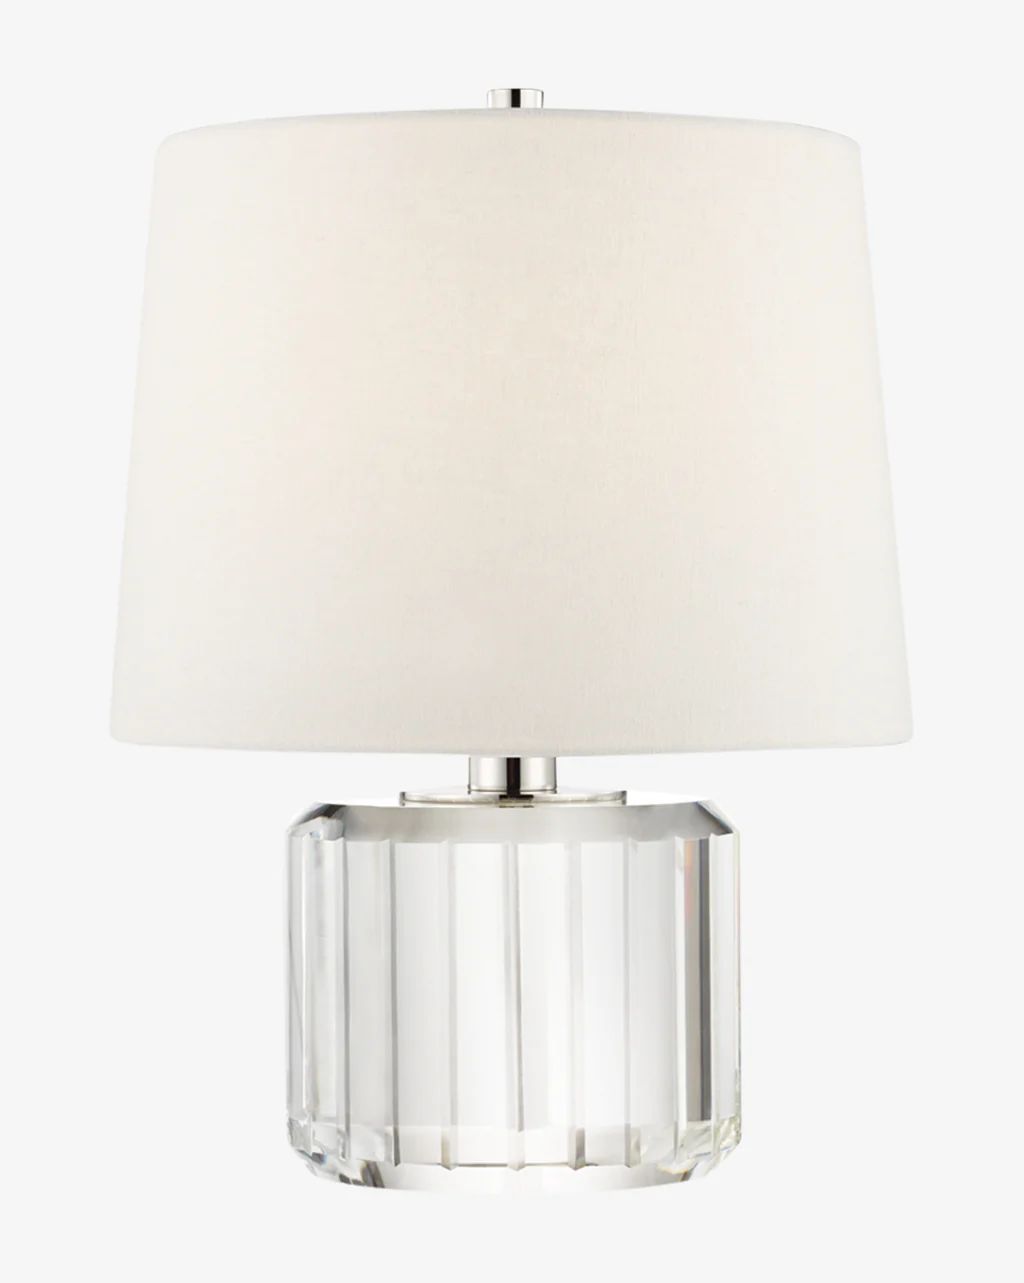 Hague Table Lamp | McGee & Co.